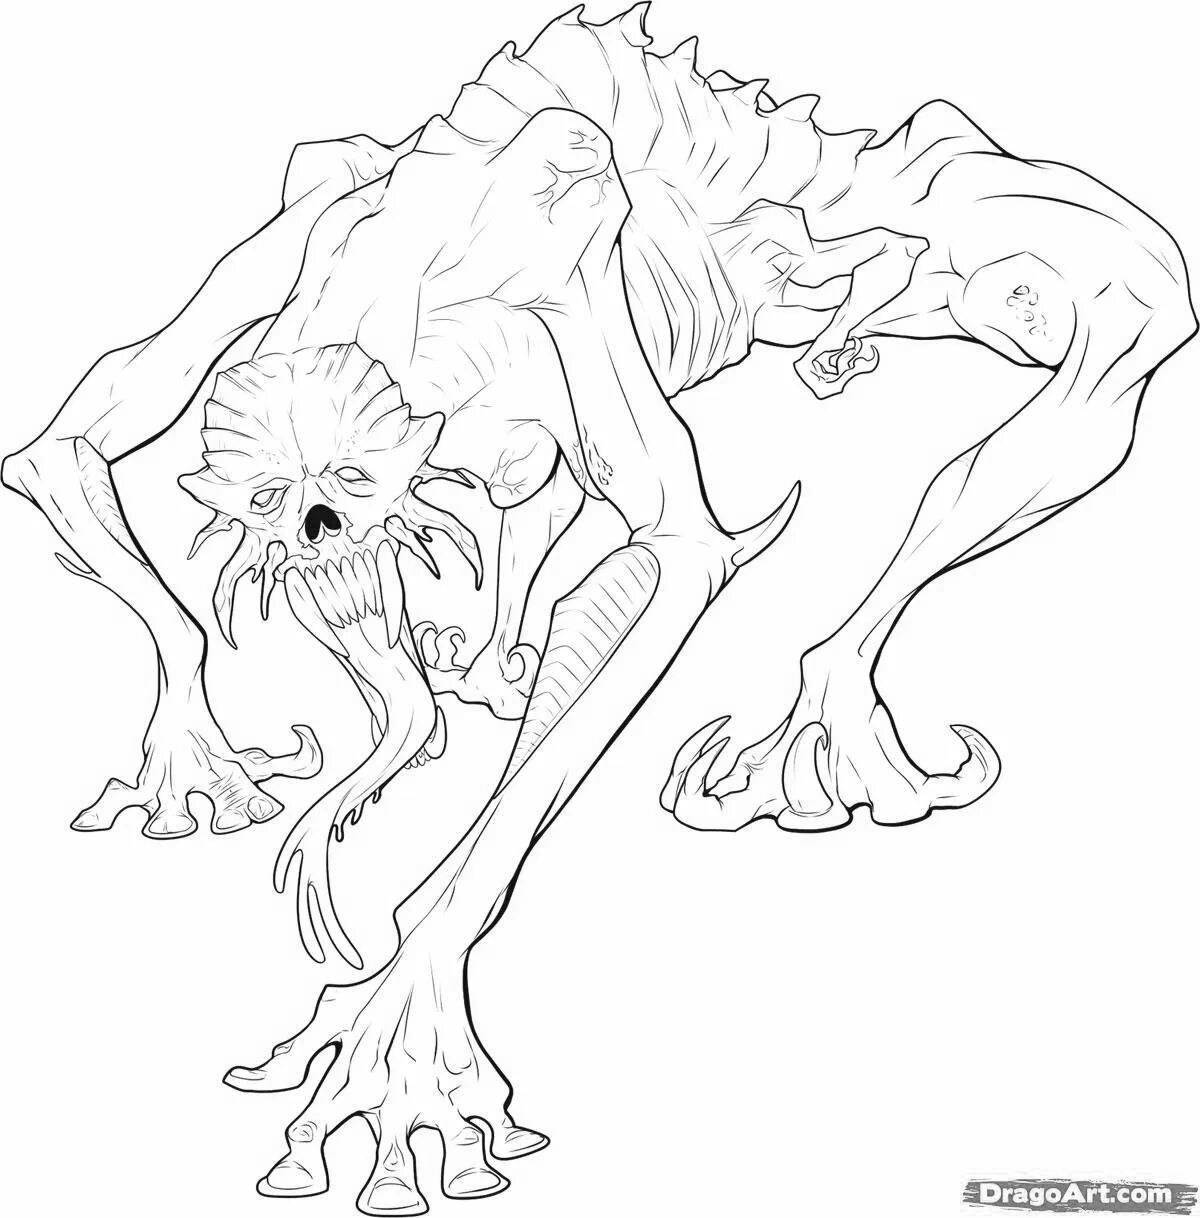 Coloring page adorable shy monster